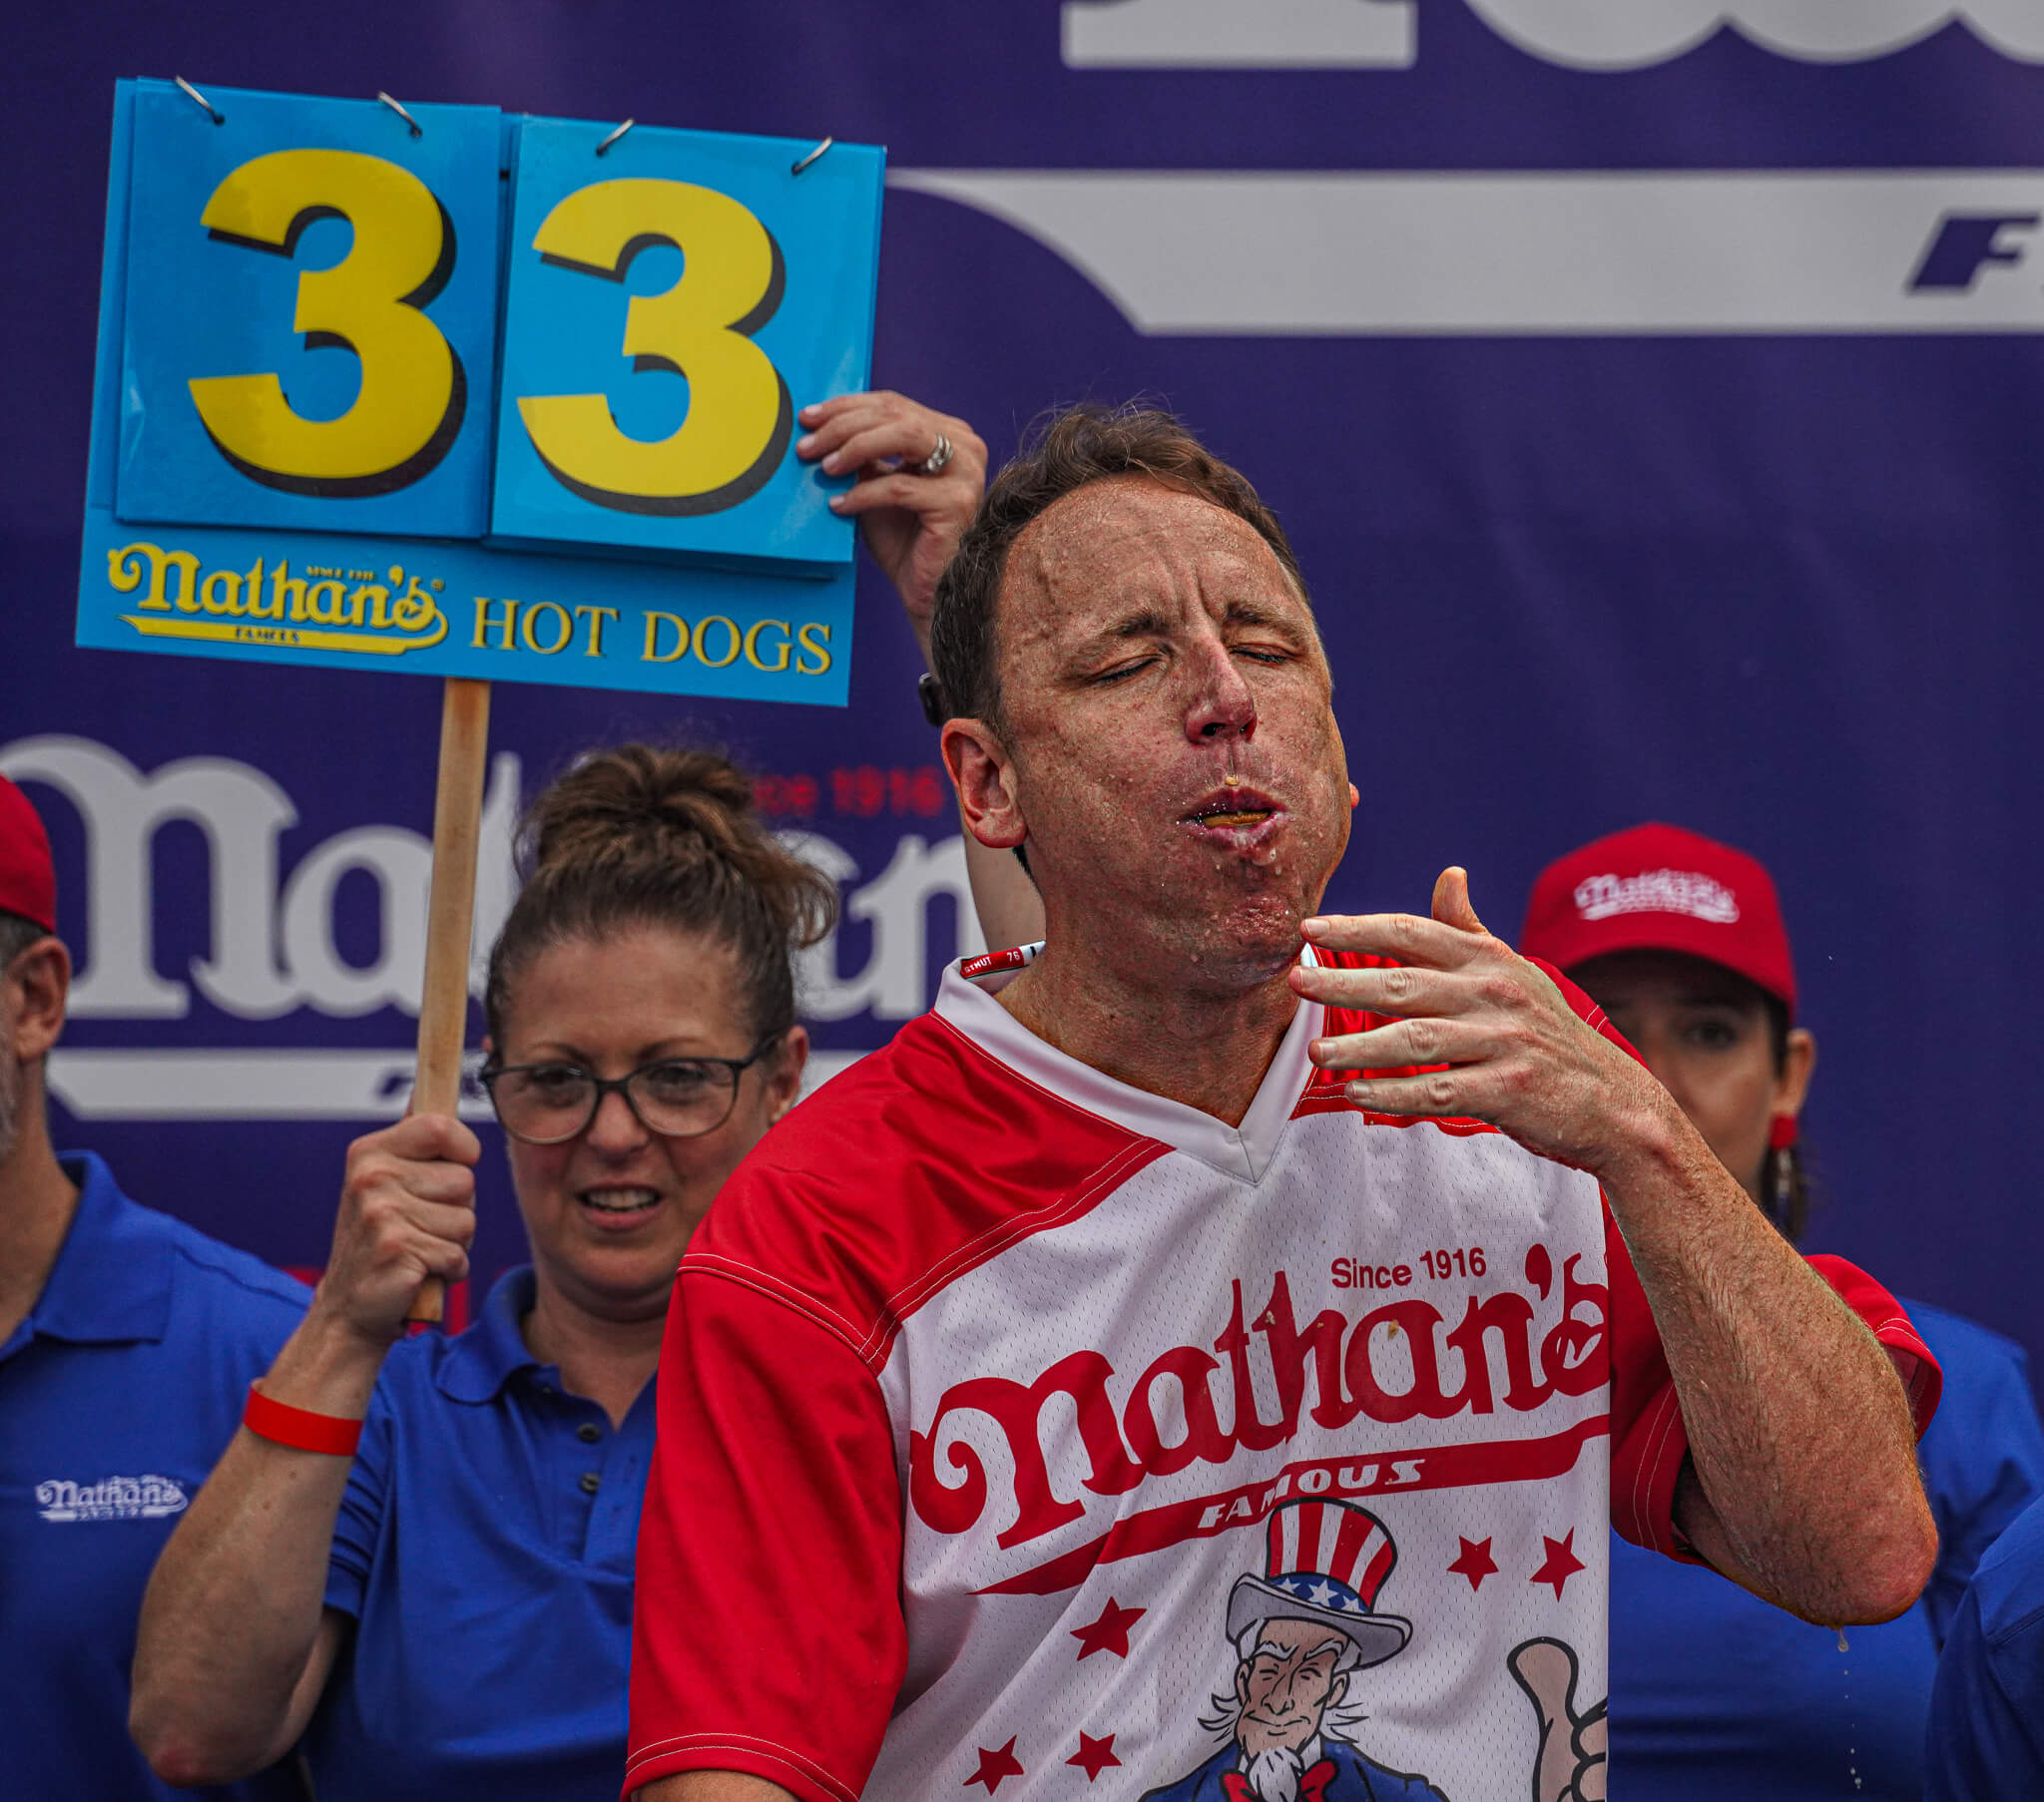 New Jersey OKs betting on Nathan's Hot Dog-eating contest